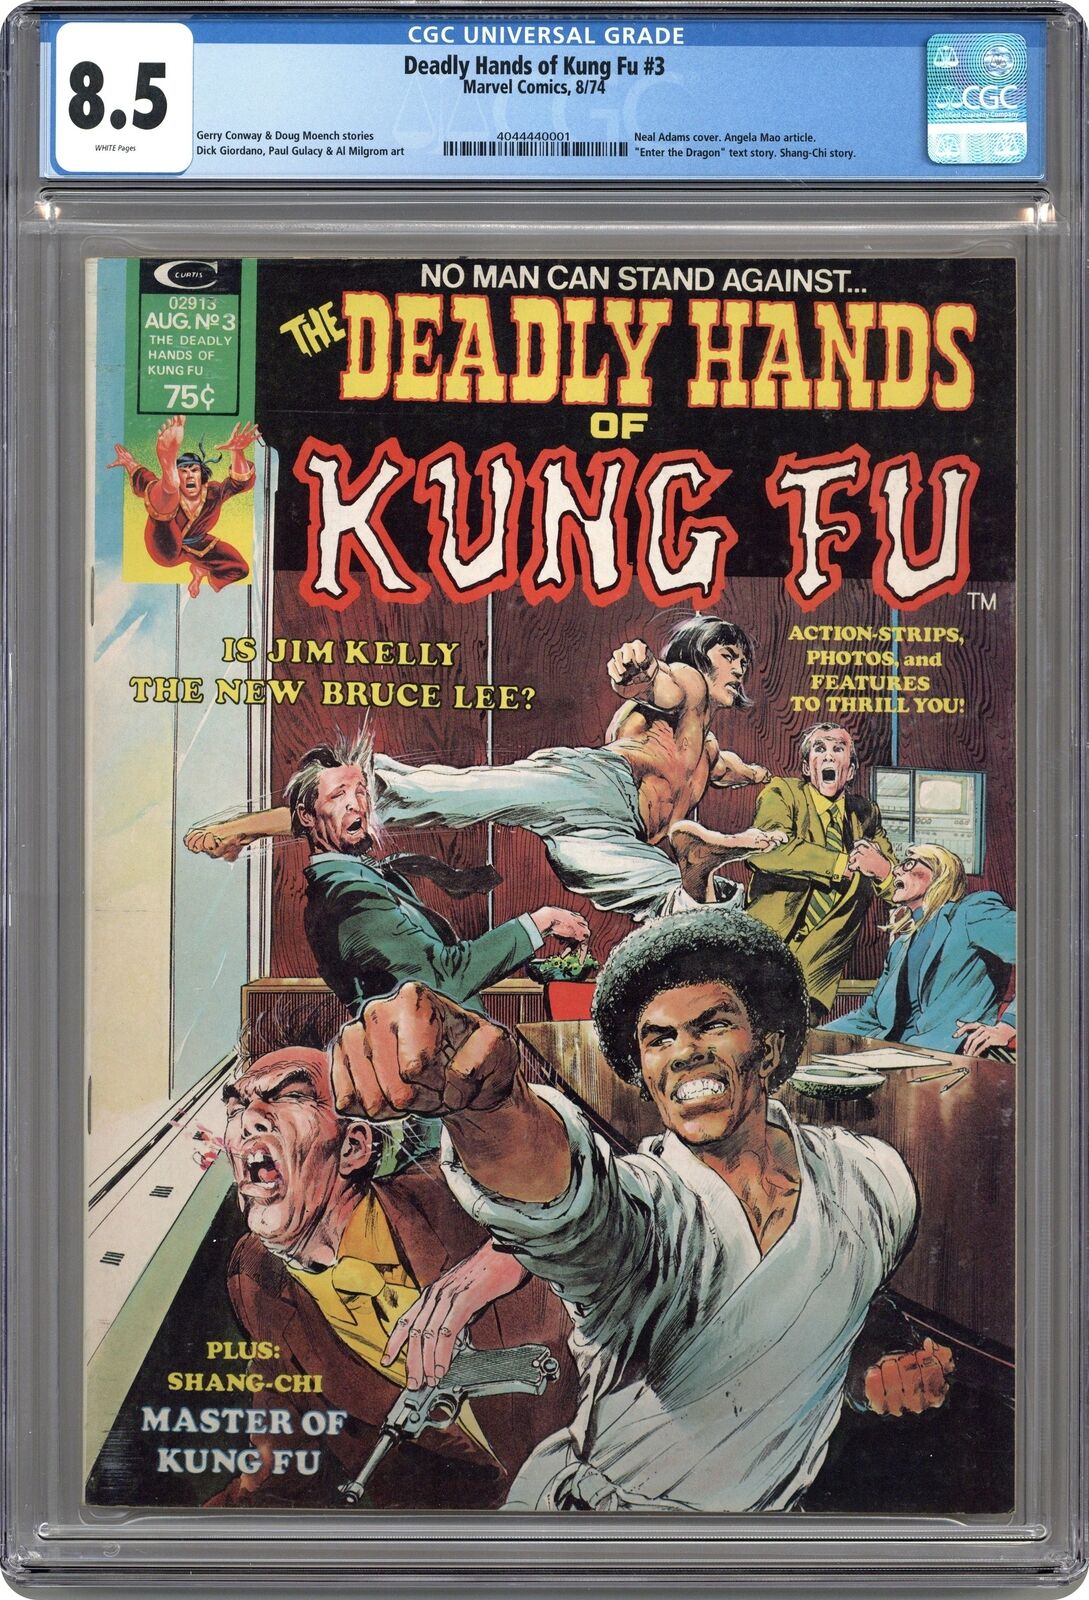 Deadly Hands of Kung Fu #3 CGC 8.5 1974 4044440001